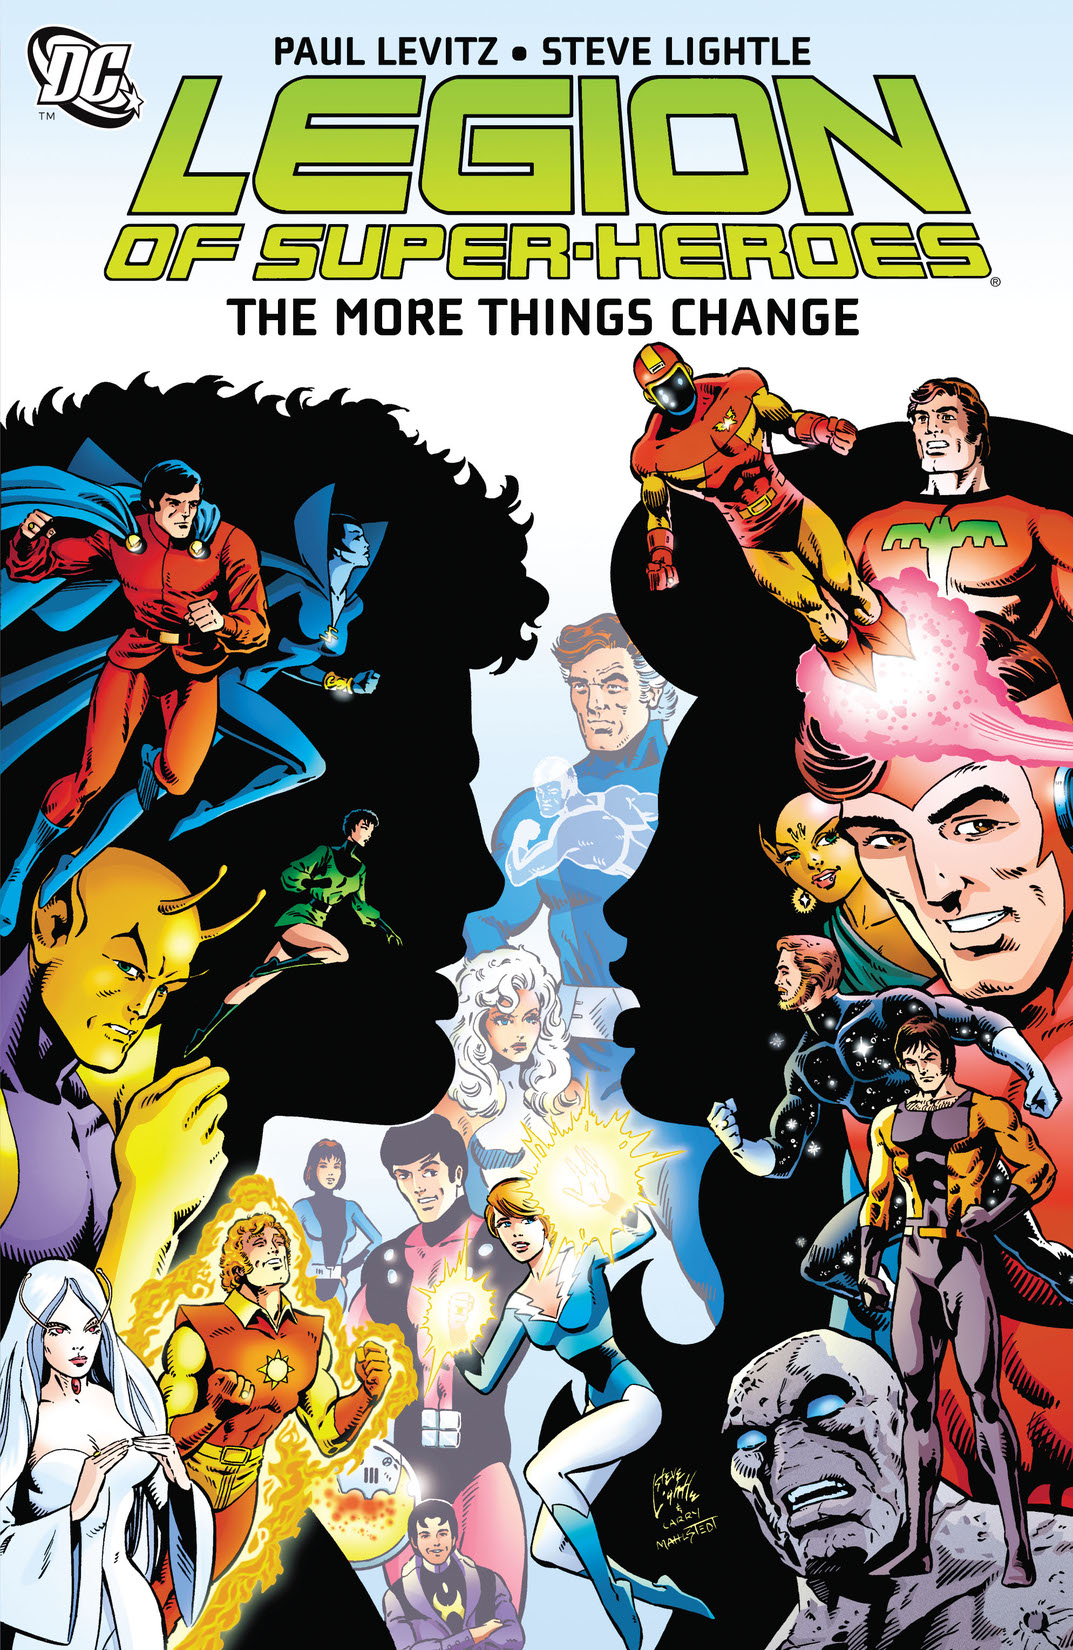 Legion of Super-Heroes: The More Things Change preview images